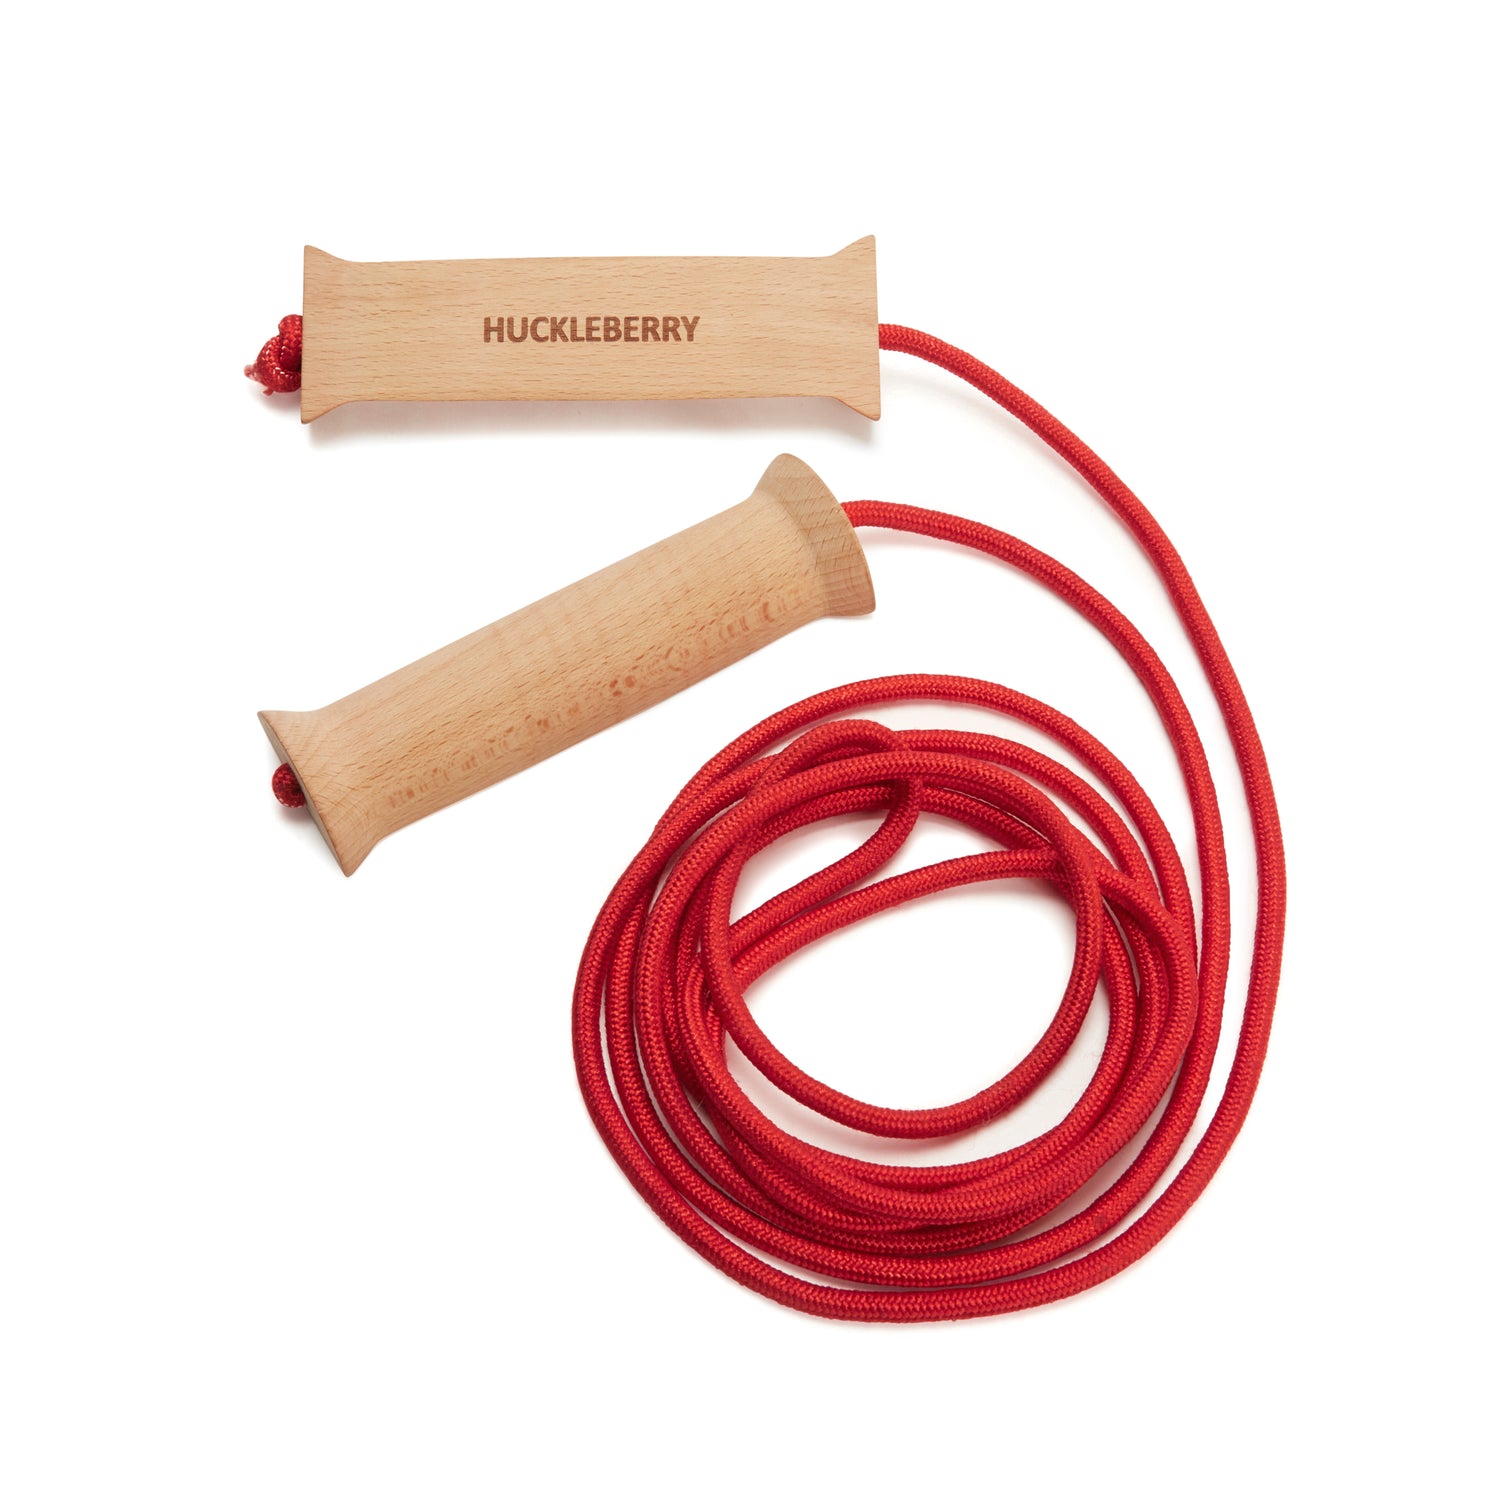 Huckleberry Skipping Rope